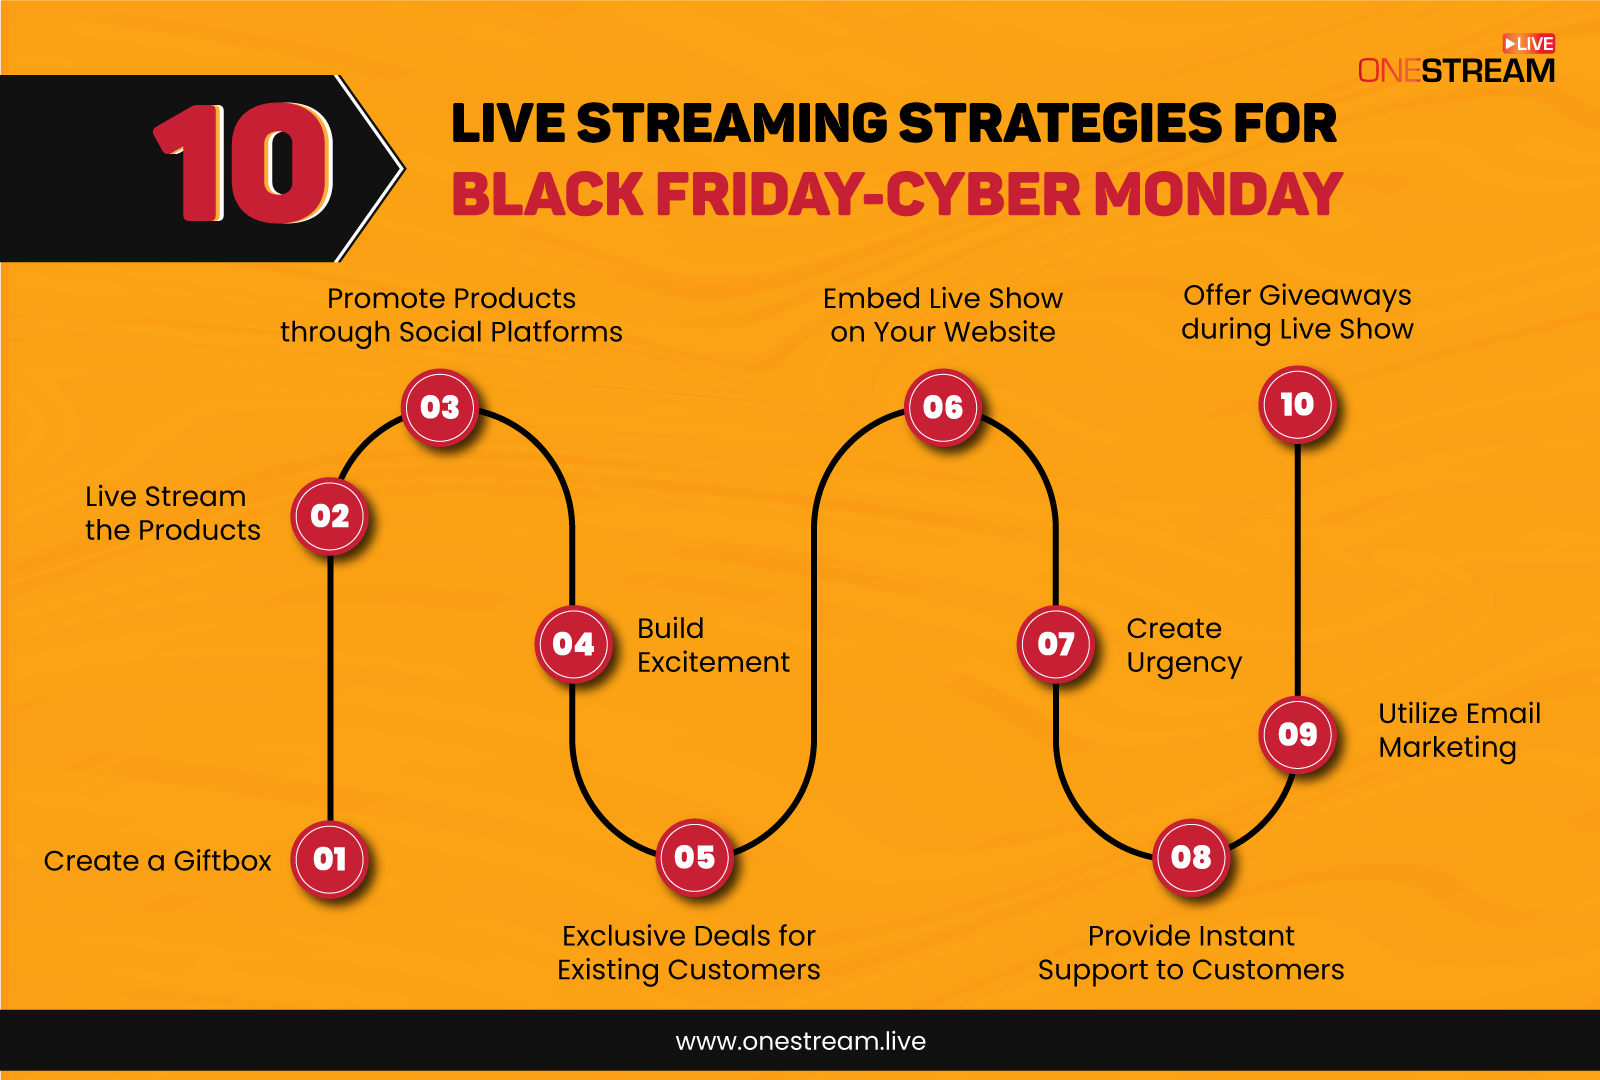 Live Stream your Black FridayCyberMonday deals with OneStream Live